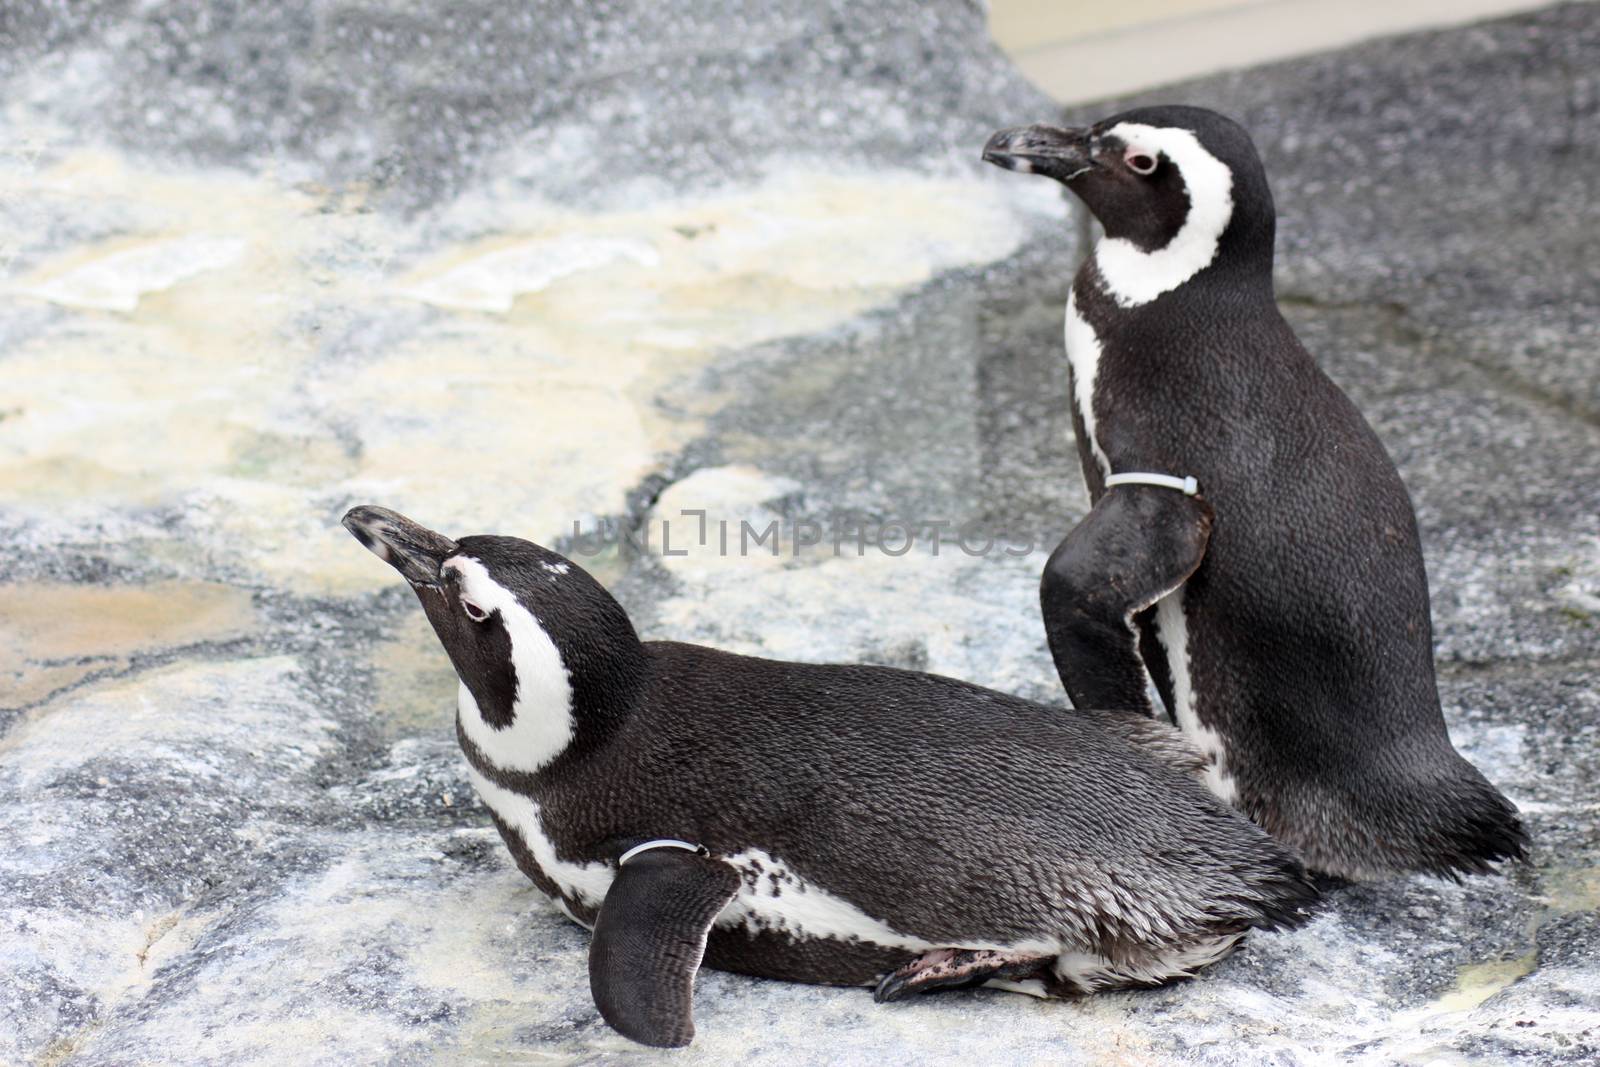 Two African penguins. African penguin - spheniscus demersus, also known as the jackass penguin and black-footed penguin